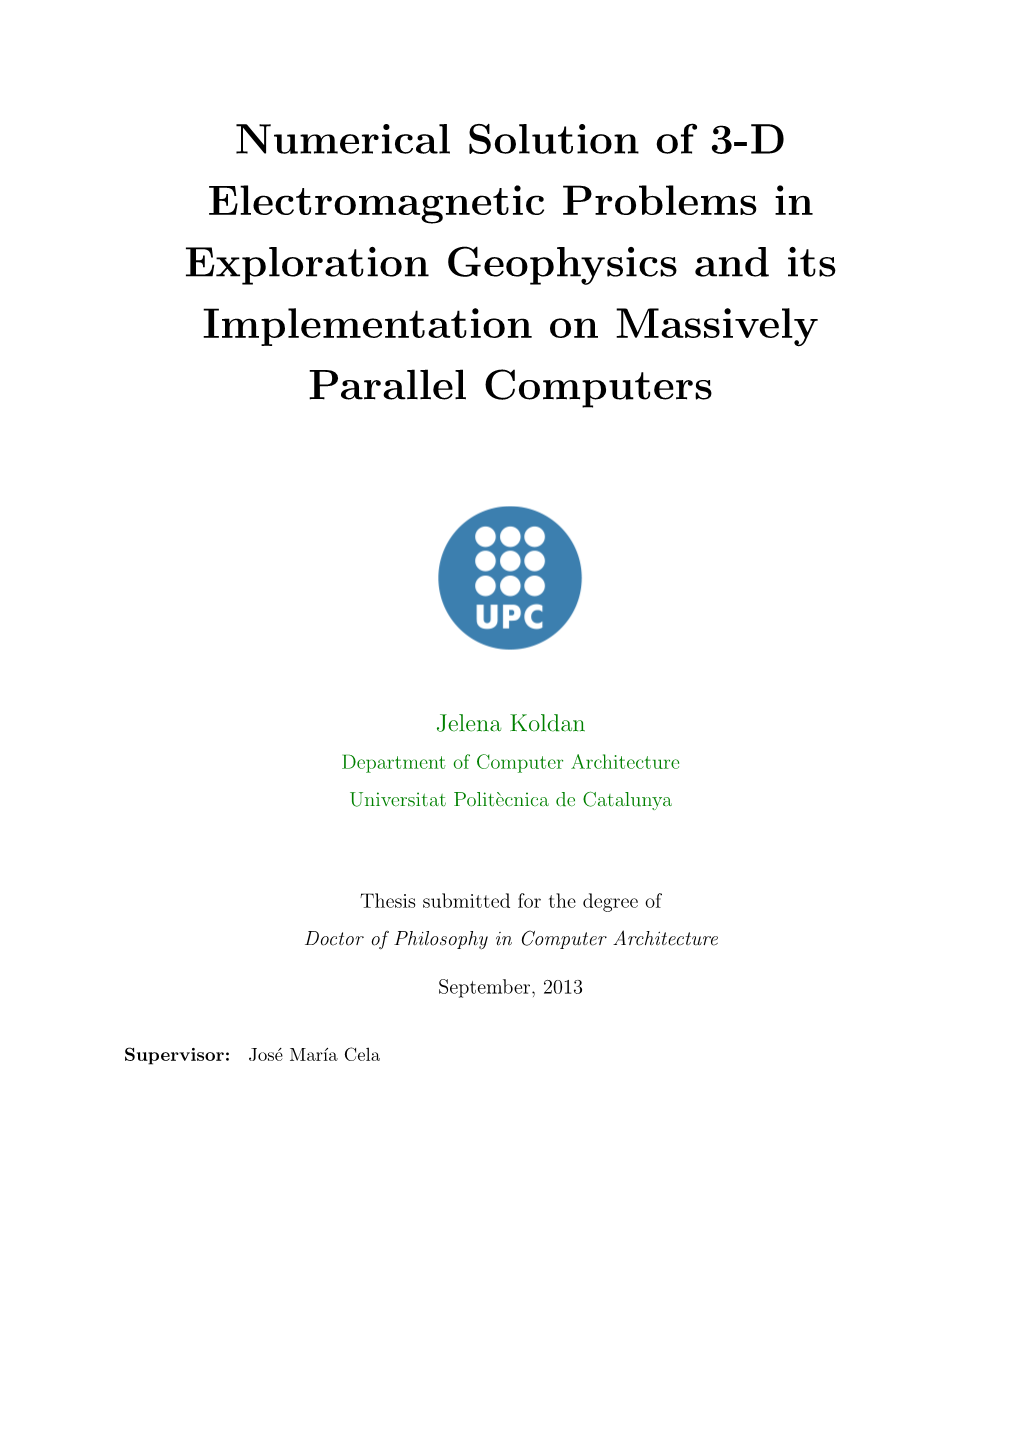 Numerical Solution of 3-D Electromagnetic Problems in Exploration Geophysics and Its Implementation on Massively Parallel Computers